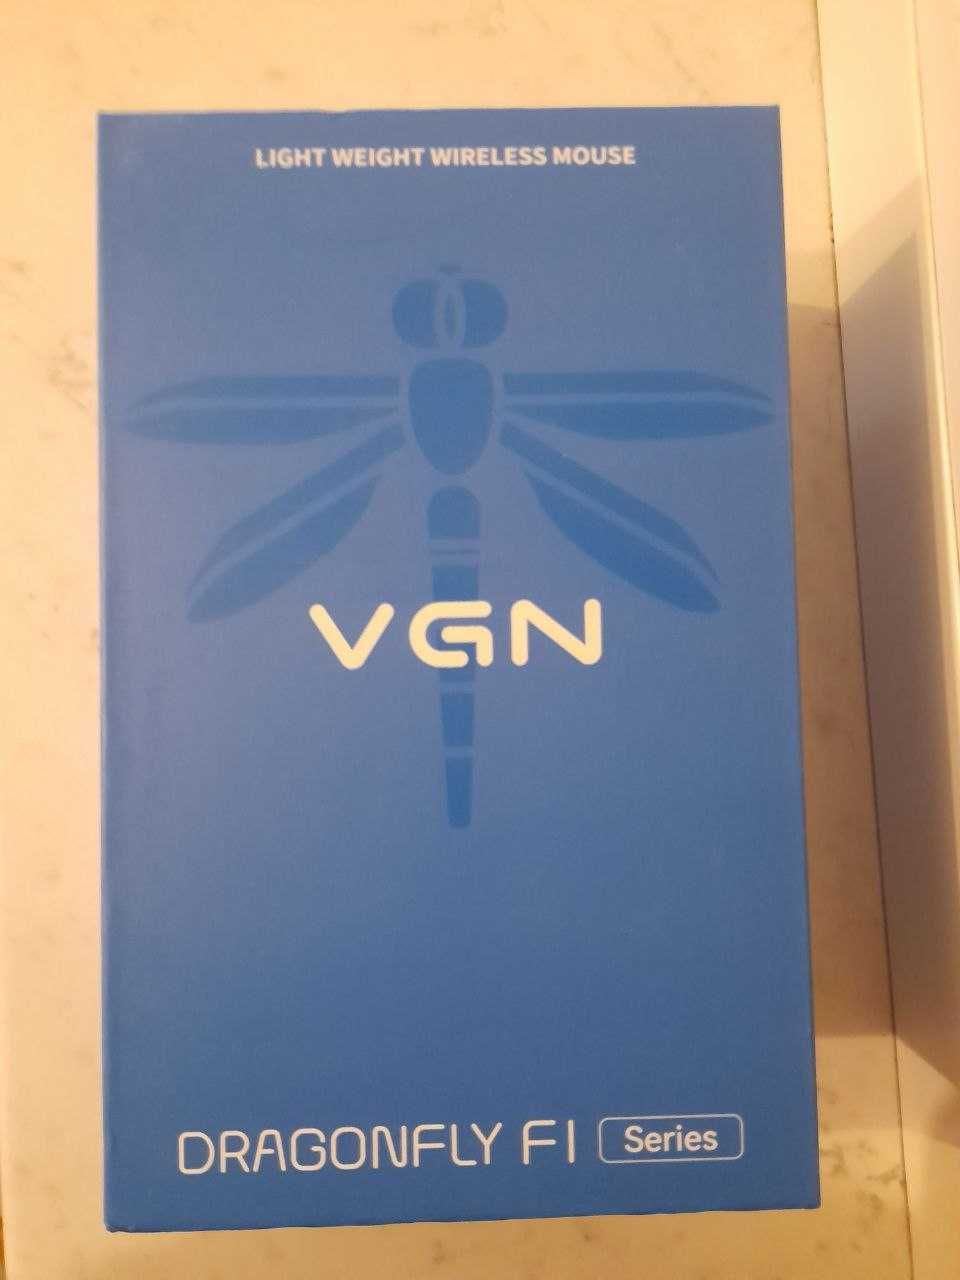 VGN Dragonfly F1 Moba